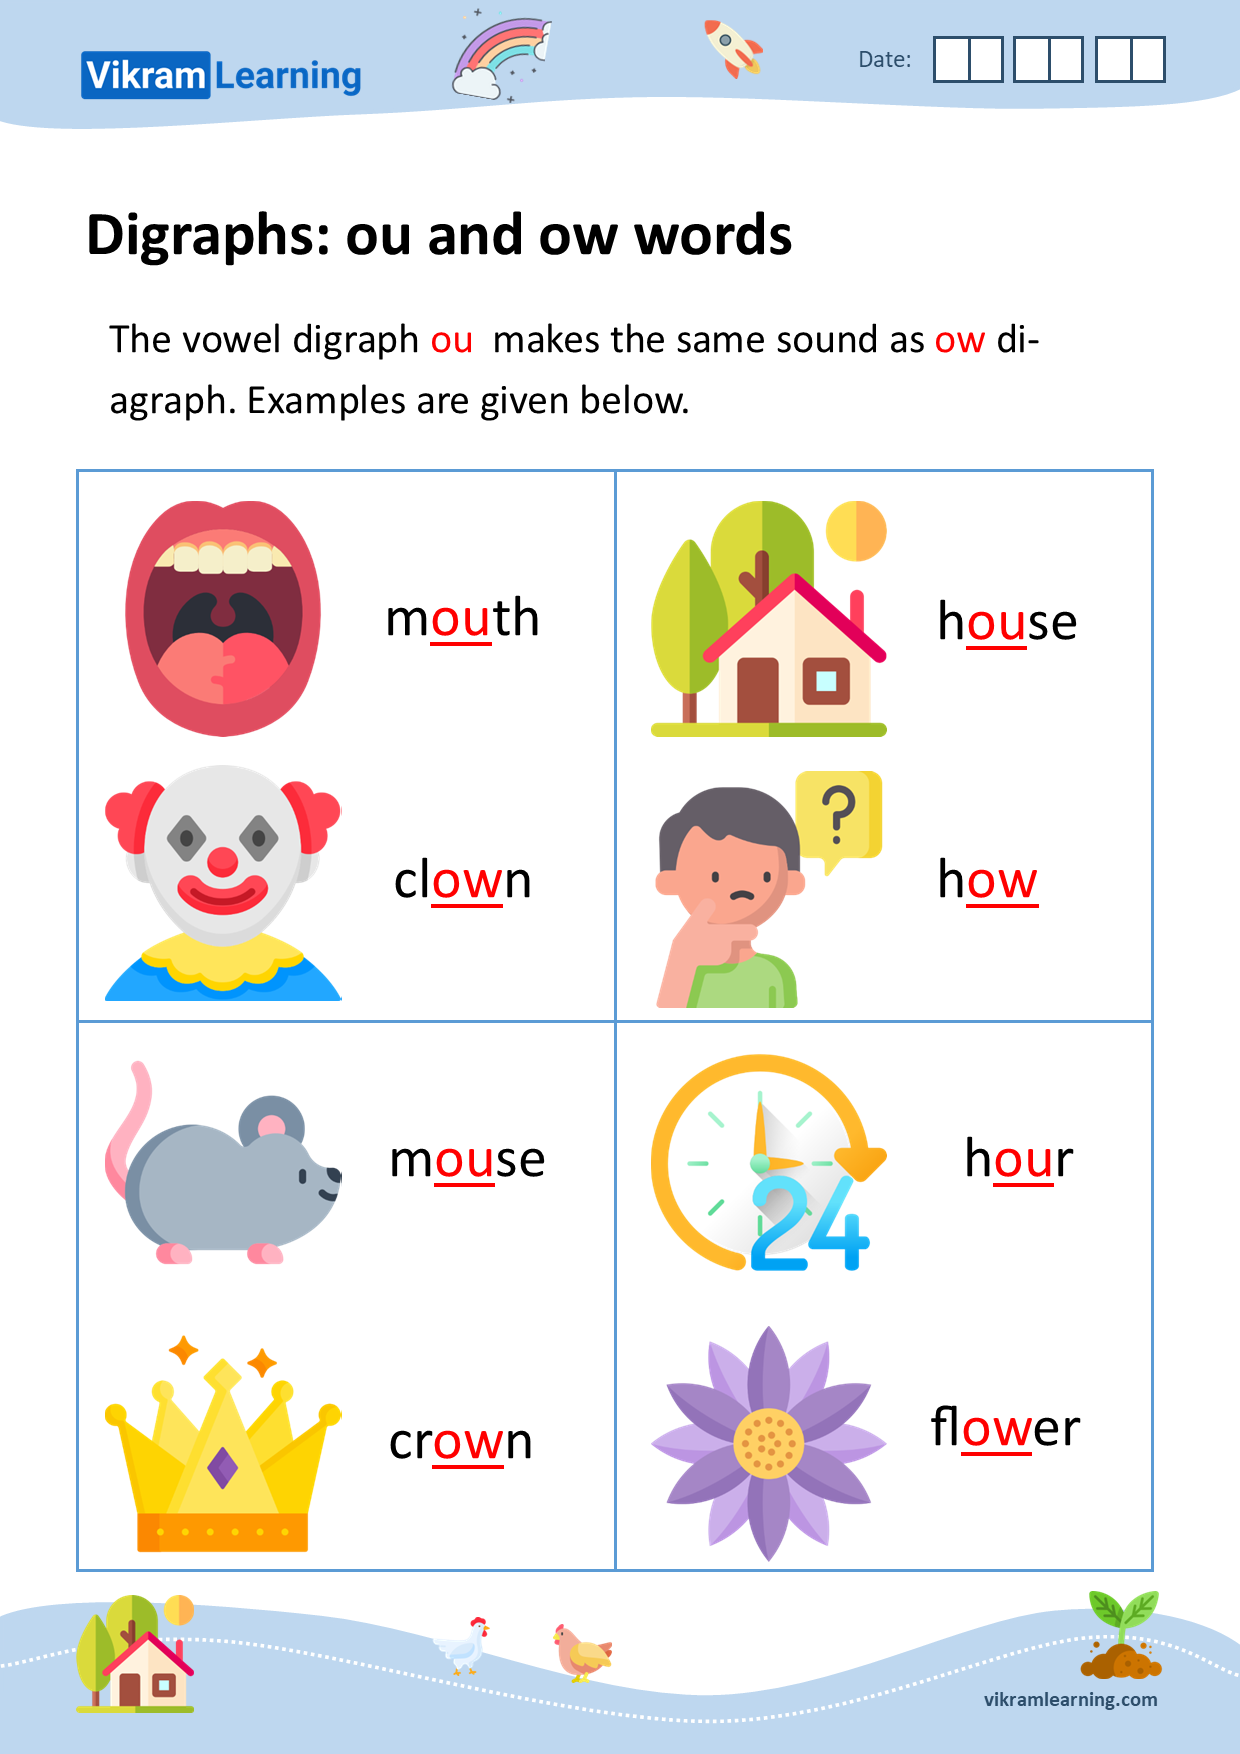 Download digraphs: ou and ow words worksheets